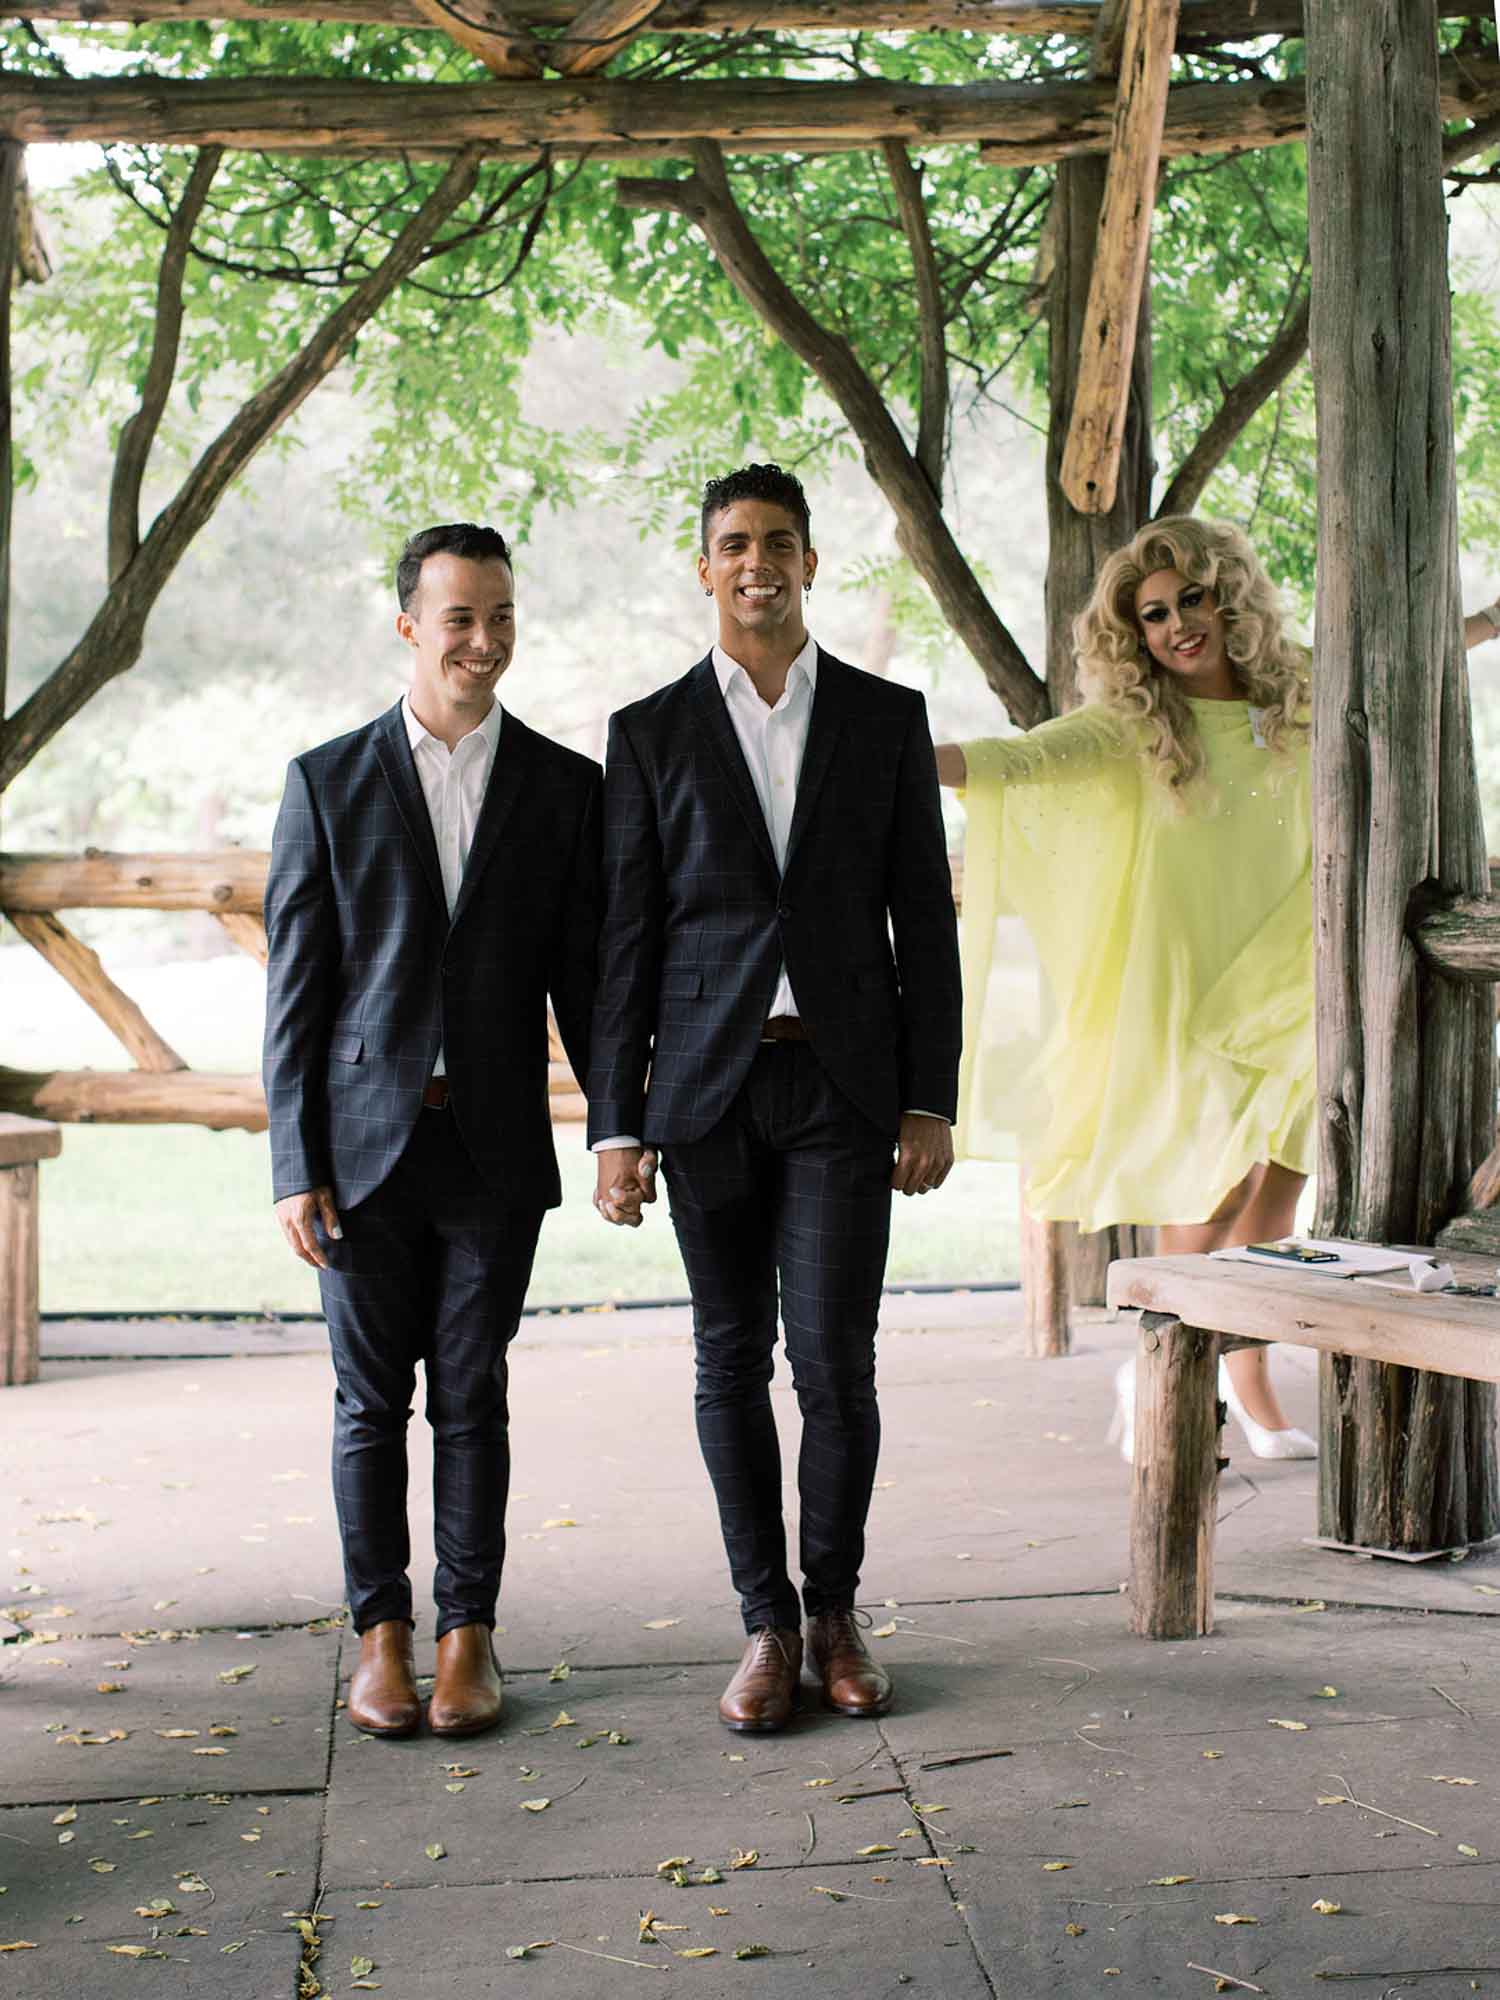 Spring elopement in central park with drag queen officiant | Judson Rappaport Photography | Featured on Equally Wed, the leading LGBTQ+ wedding magazine